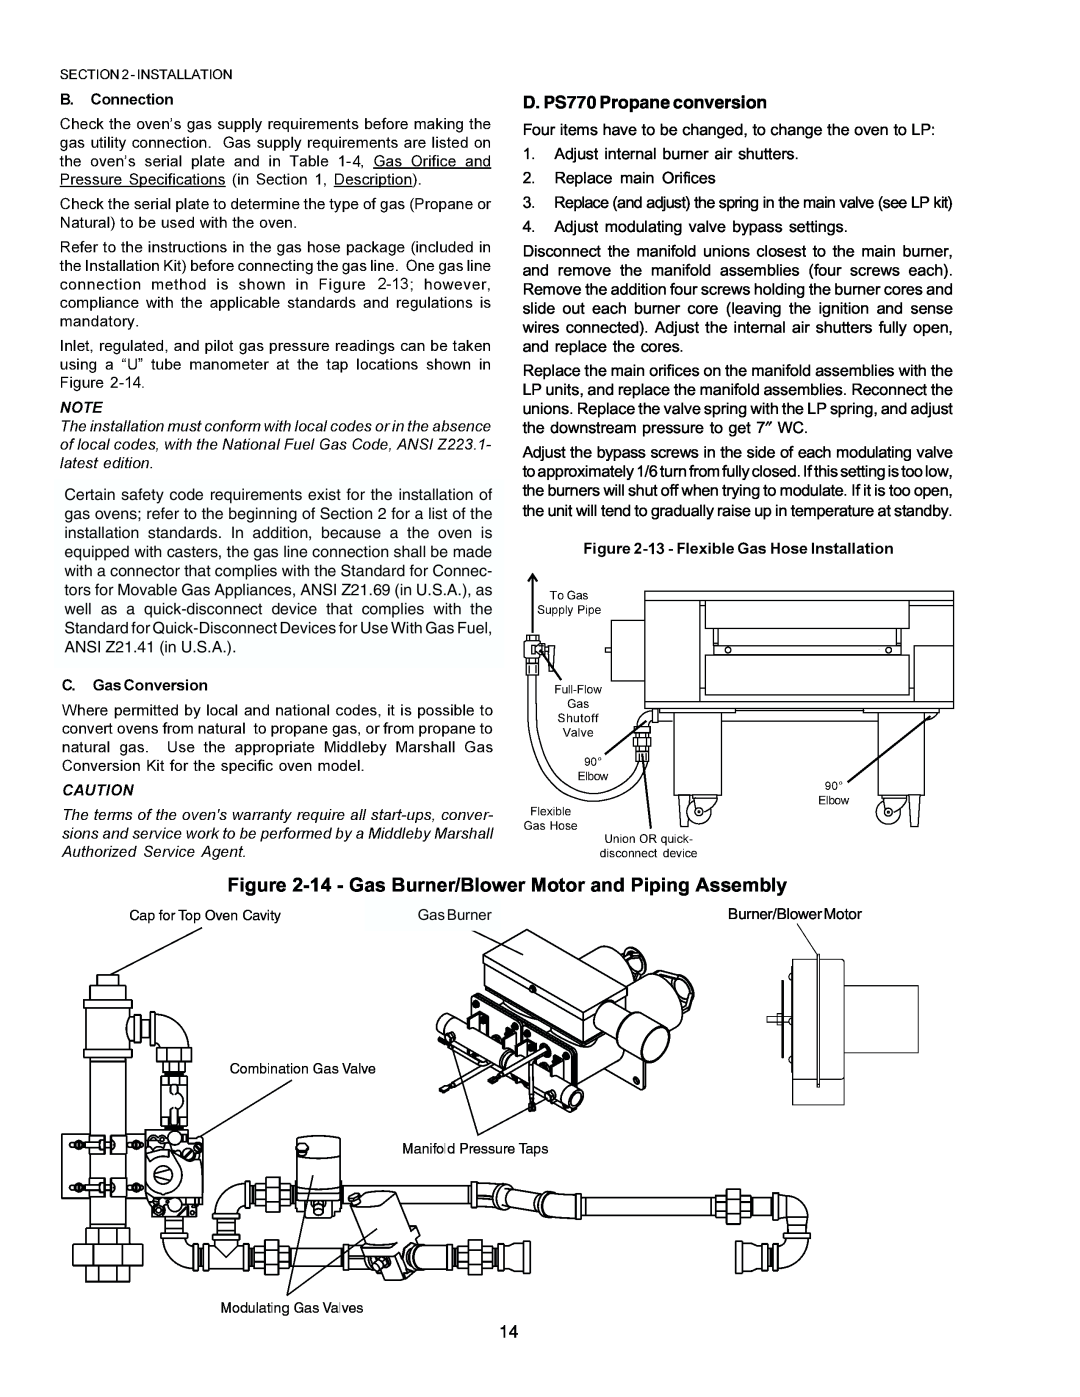 Middleby Marshall PS770G GAS installation manual D. PS770 Propane conversion 